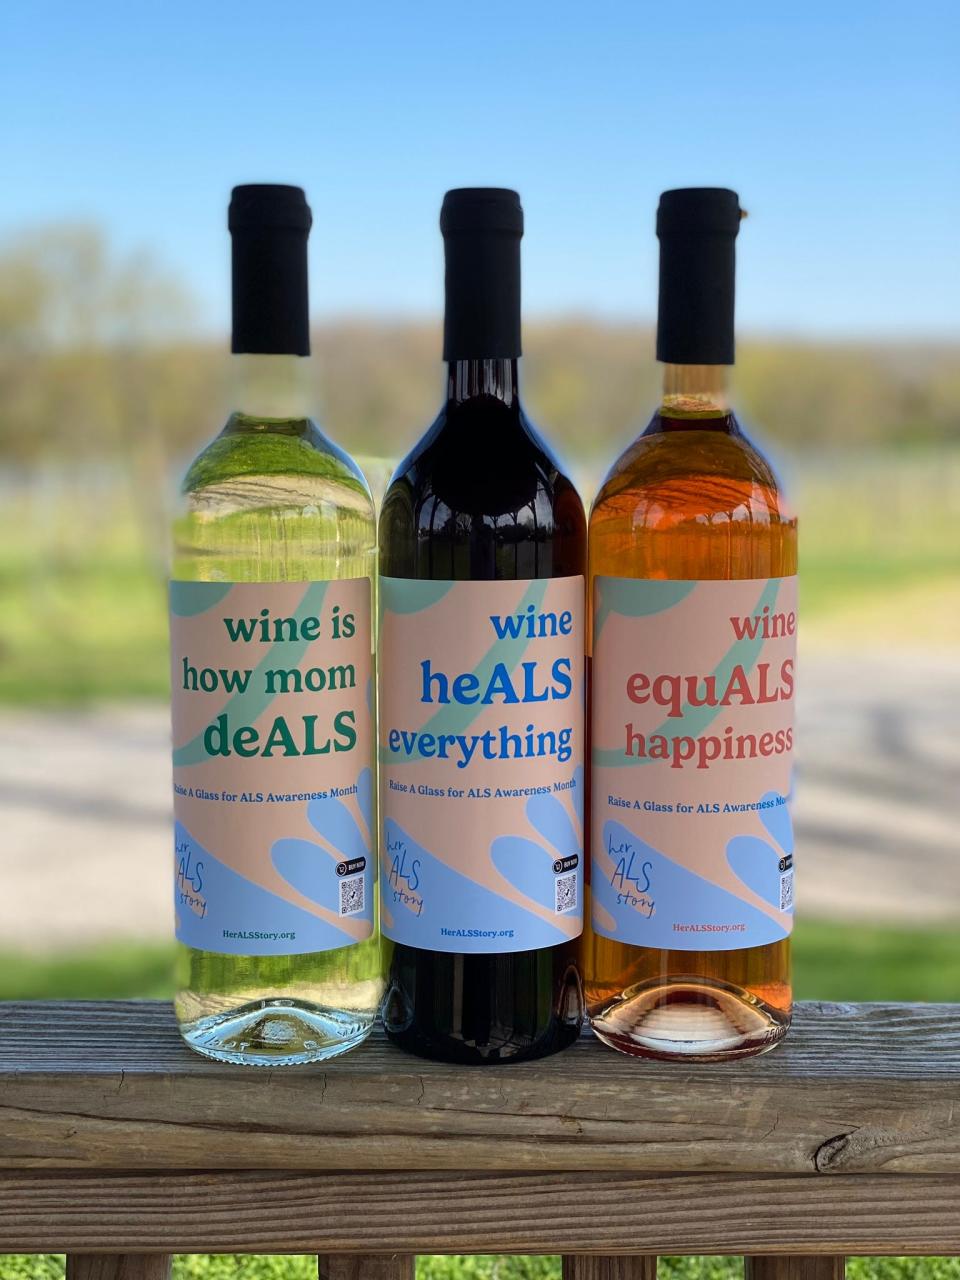 The new line of wines includes the HeALS Everything Red, How Mom DeALS white and Wine EquALS Happiness Blush.